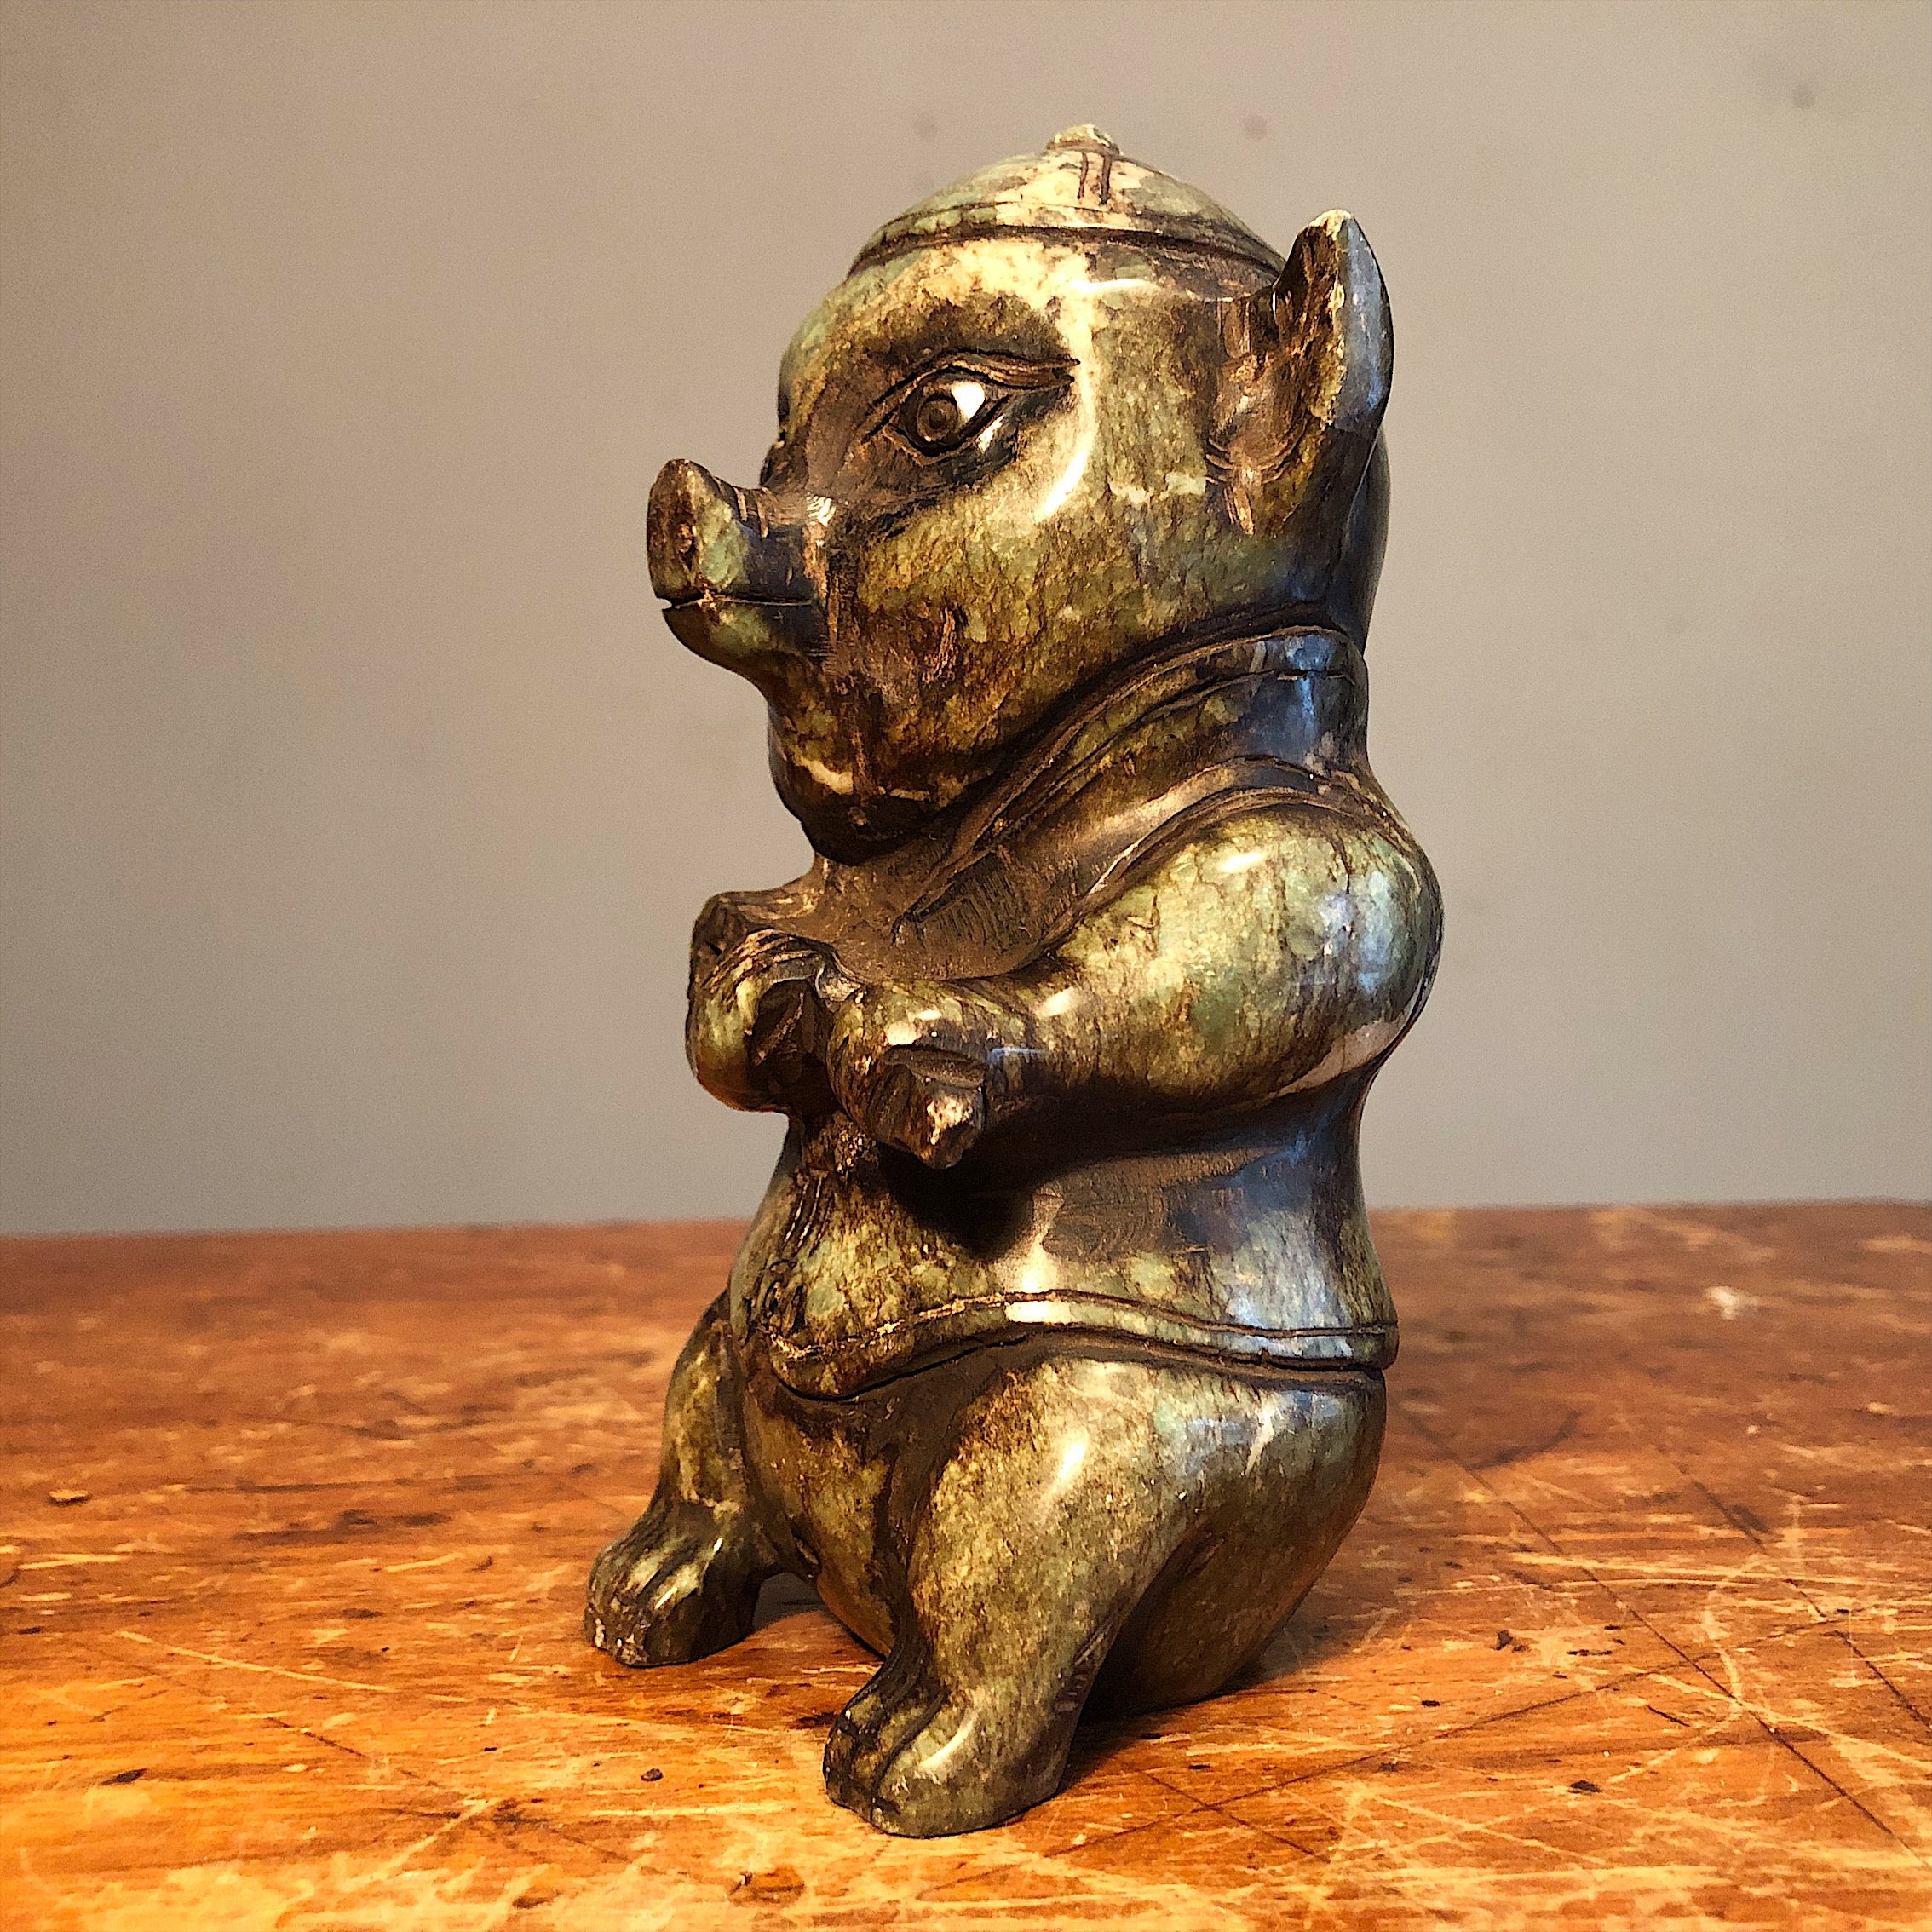 Chinese Jade Sculpture of Pig Figure - Unusual Asian Artwork - Signed on Reverse - Mystery Artist - 6" Tall - Collector's Estate - Rare